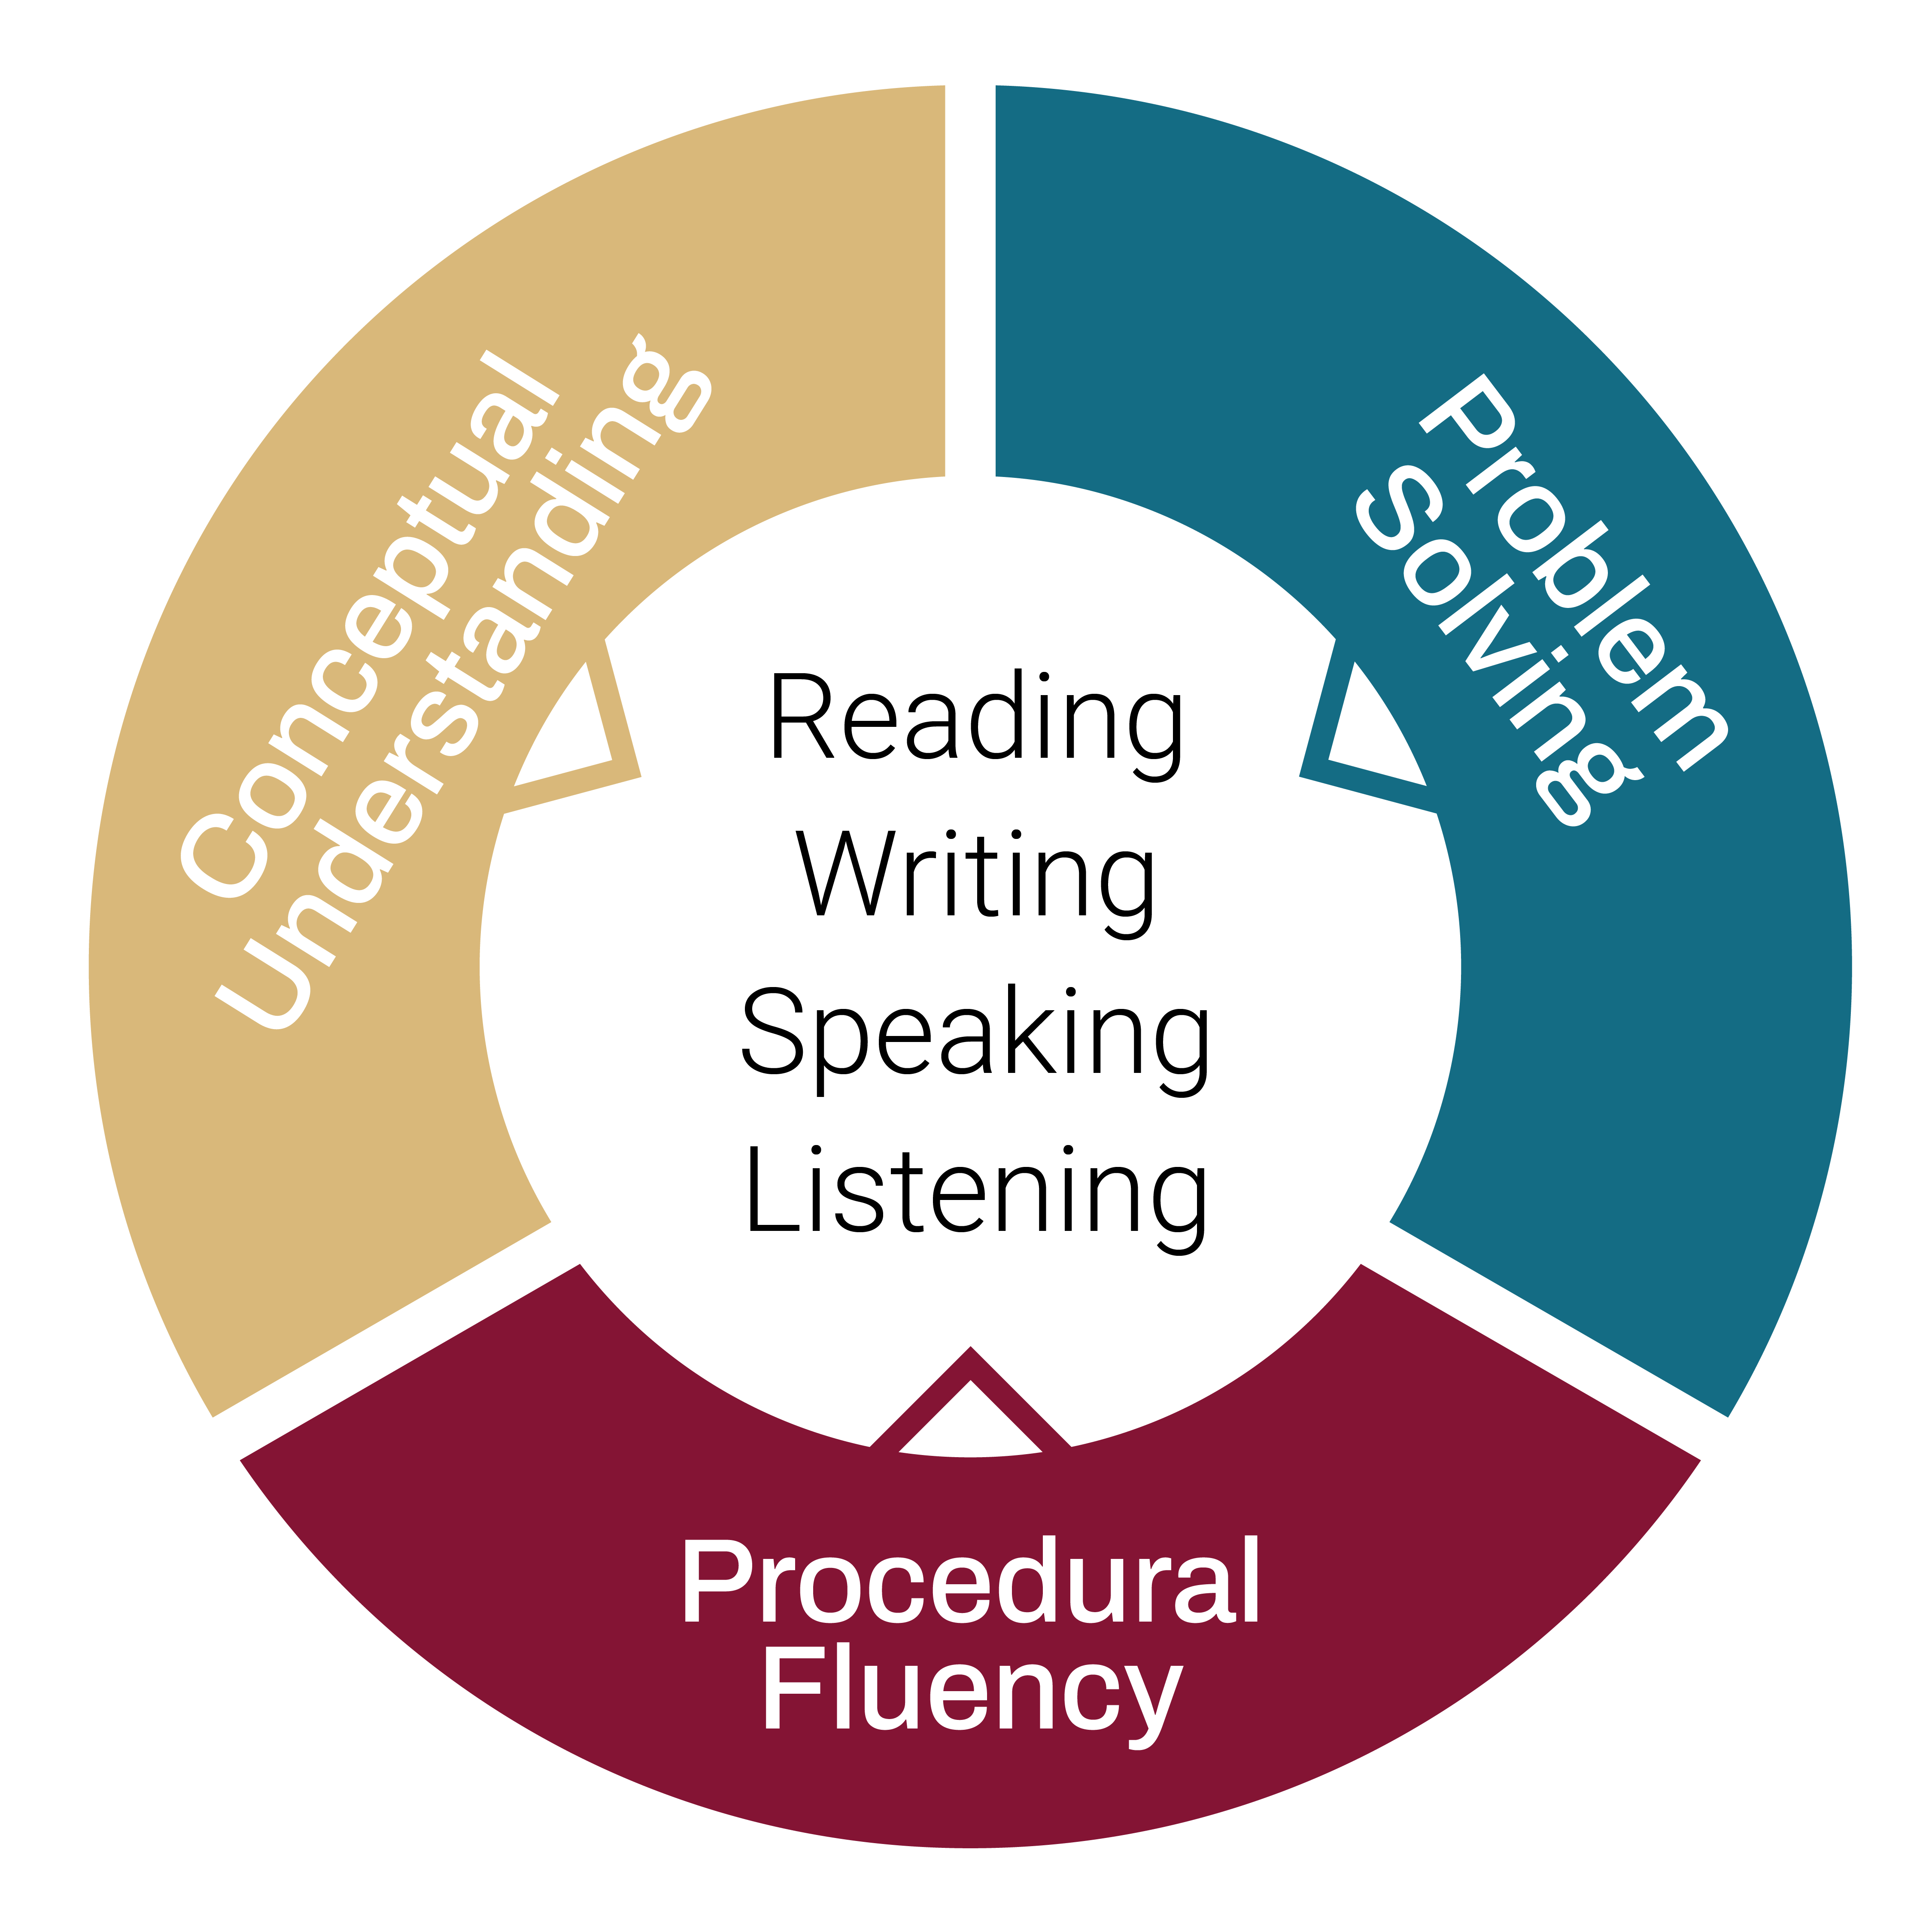 Math Literacy instructional framework professional learning approach drives results.